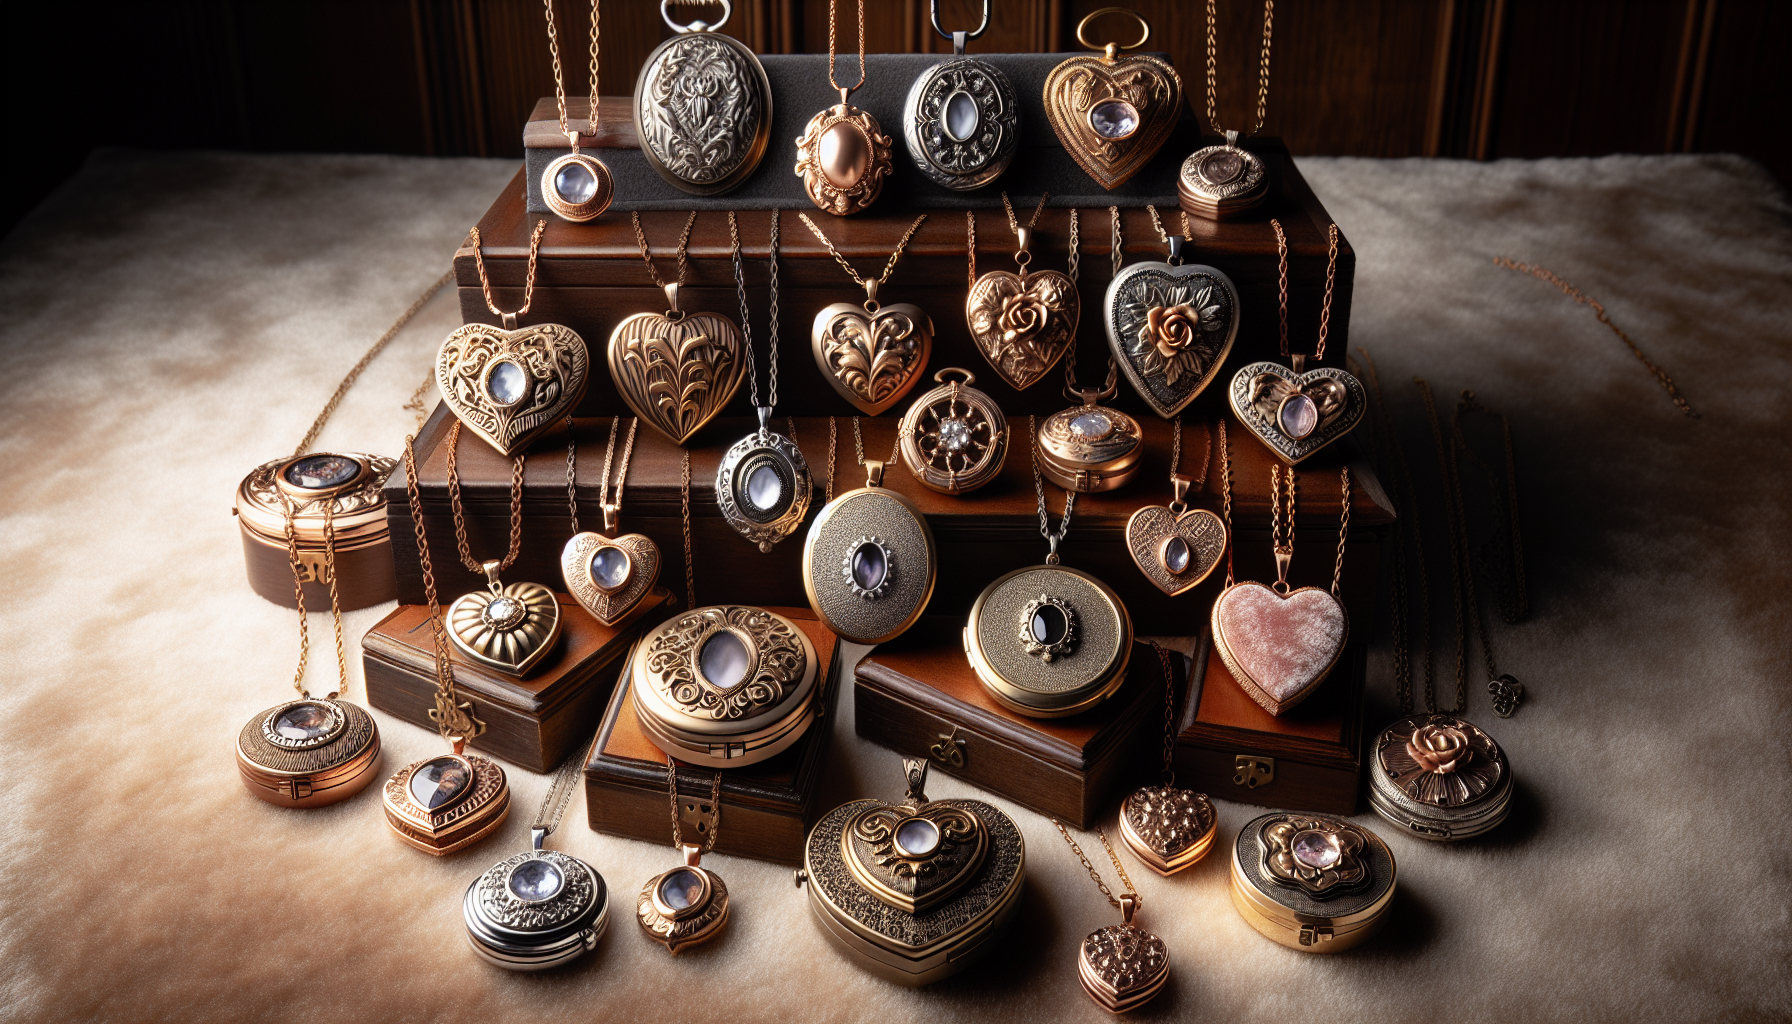 Visualize an assortment of locket style necklaces, representing a timeless accessory trend. Display these necklaces against a plush velvet surface elevated by antique wooden stands. Each locket should